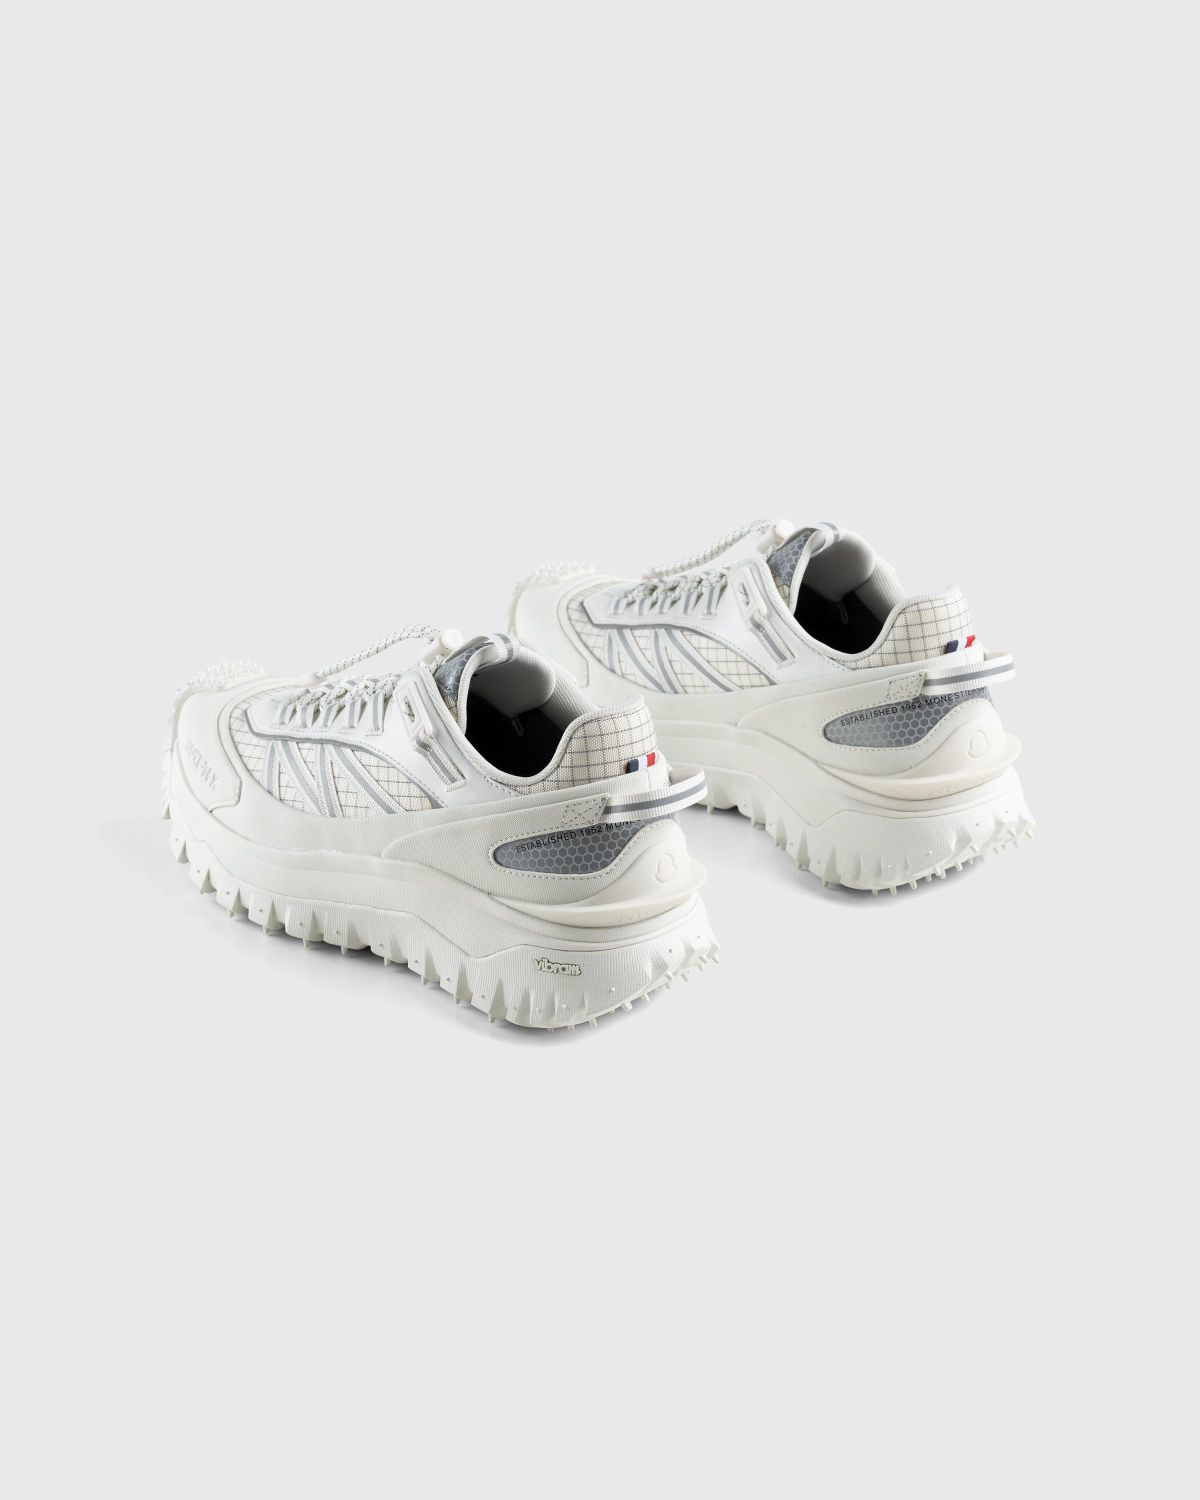 Moncler – Trailgrip GTX Sneakers Off White - Sneakers - White - Image 4